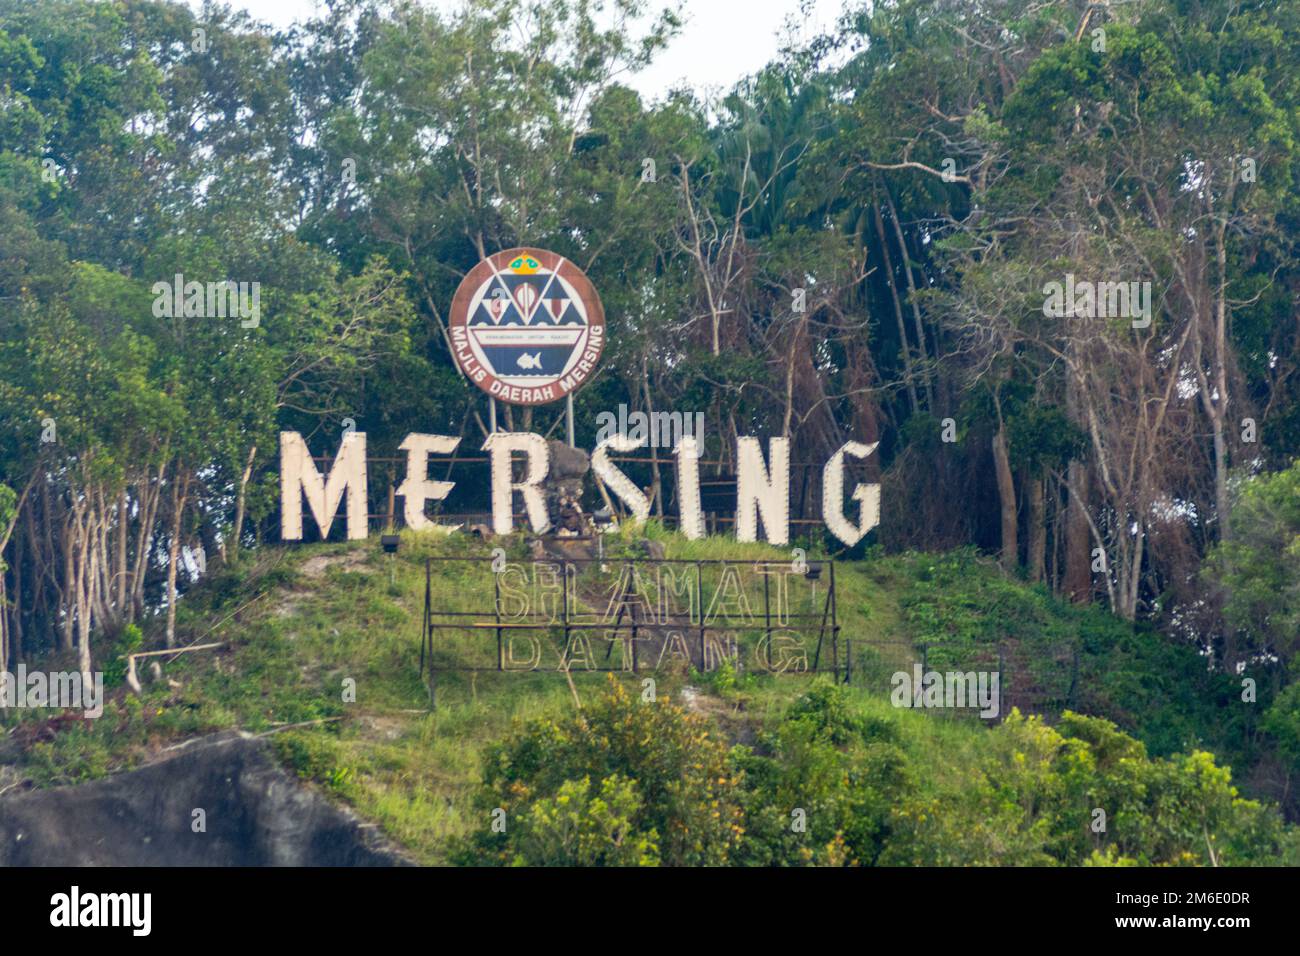 MERSING/MALAYSIA - feb 28 2015 : Streets and buildings of Mersing town in Malaysia Stock Photo